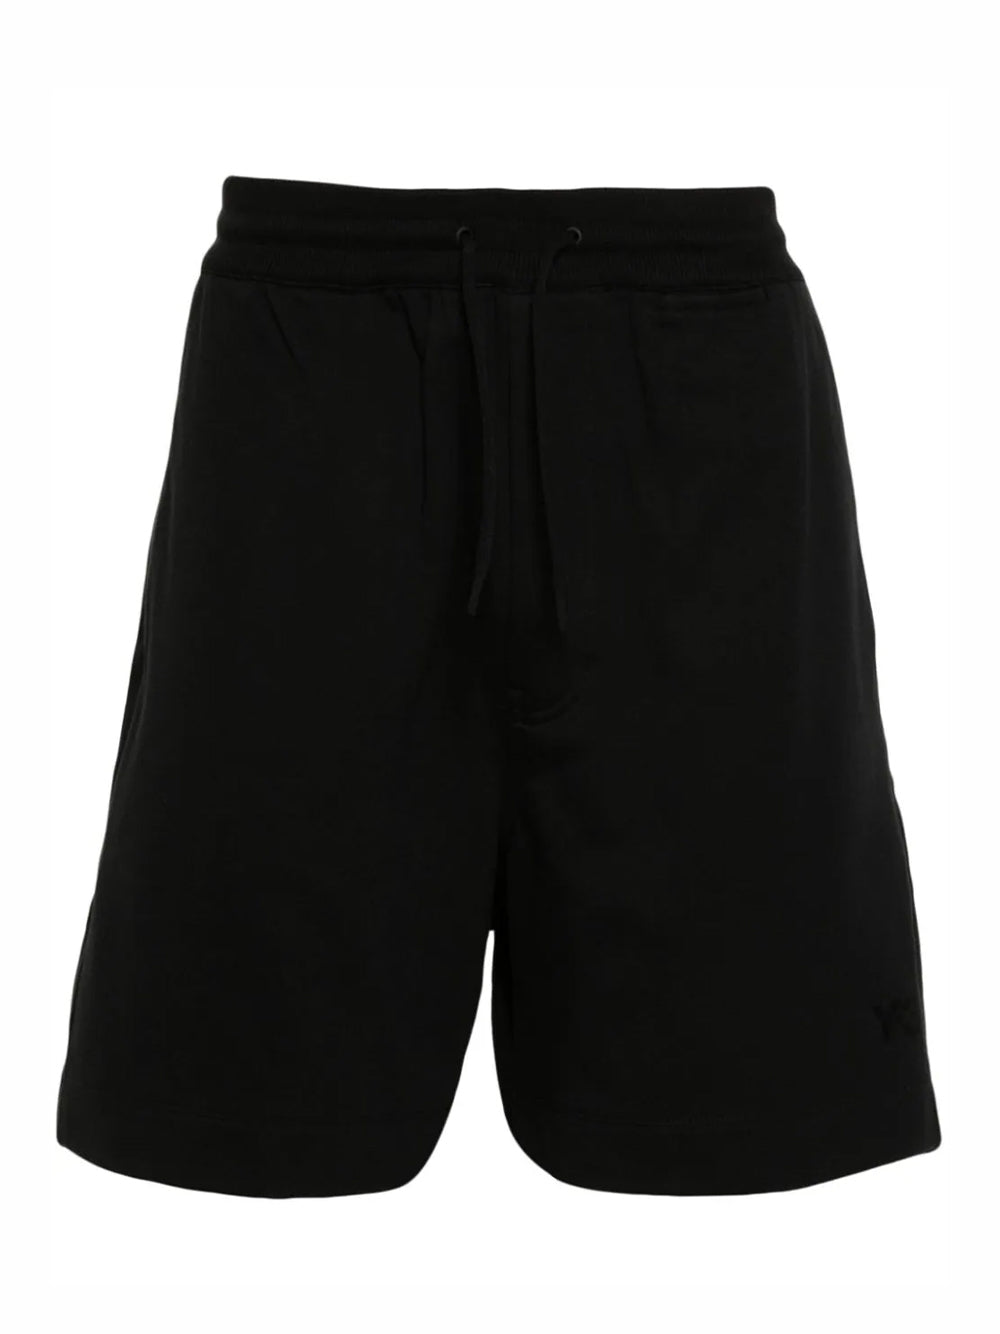 French Terry Shorts (Black)